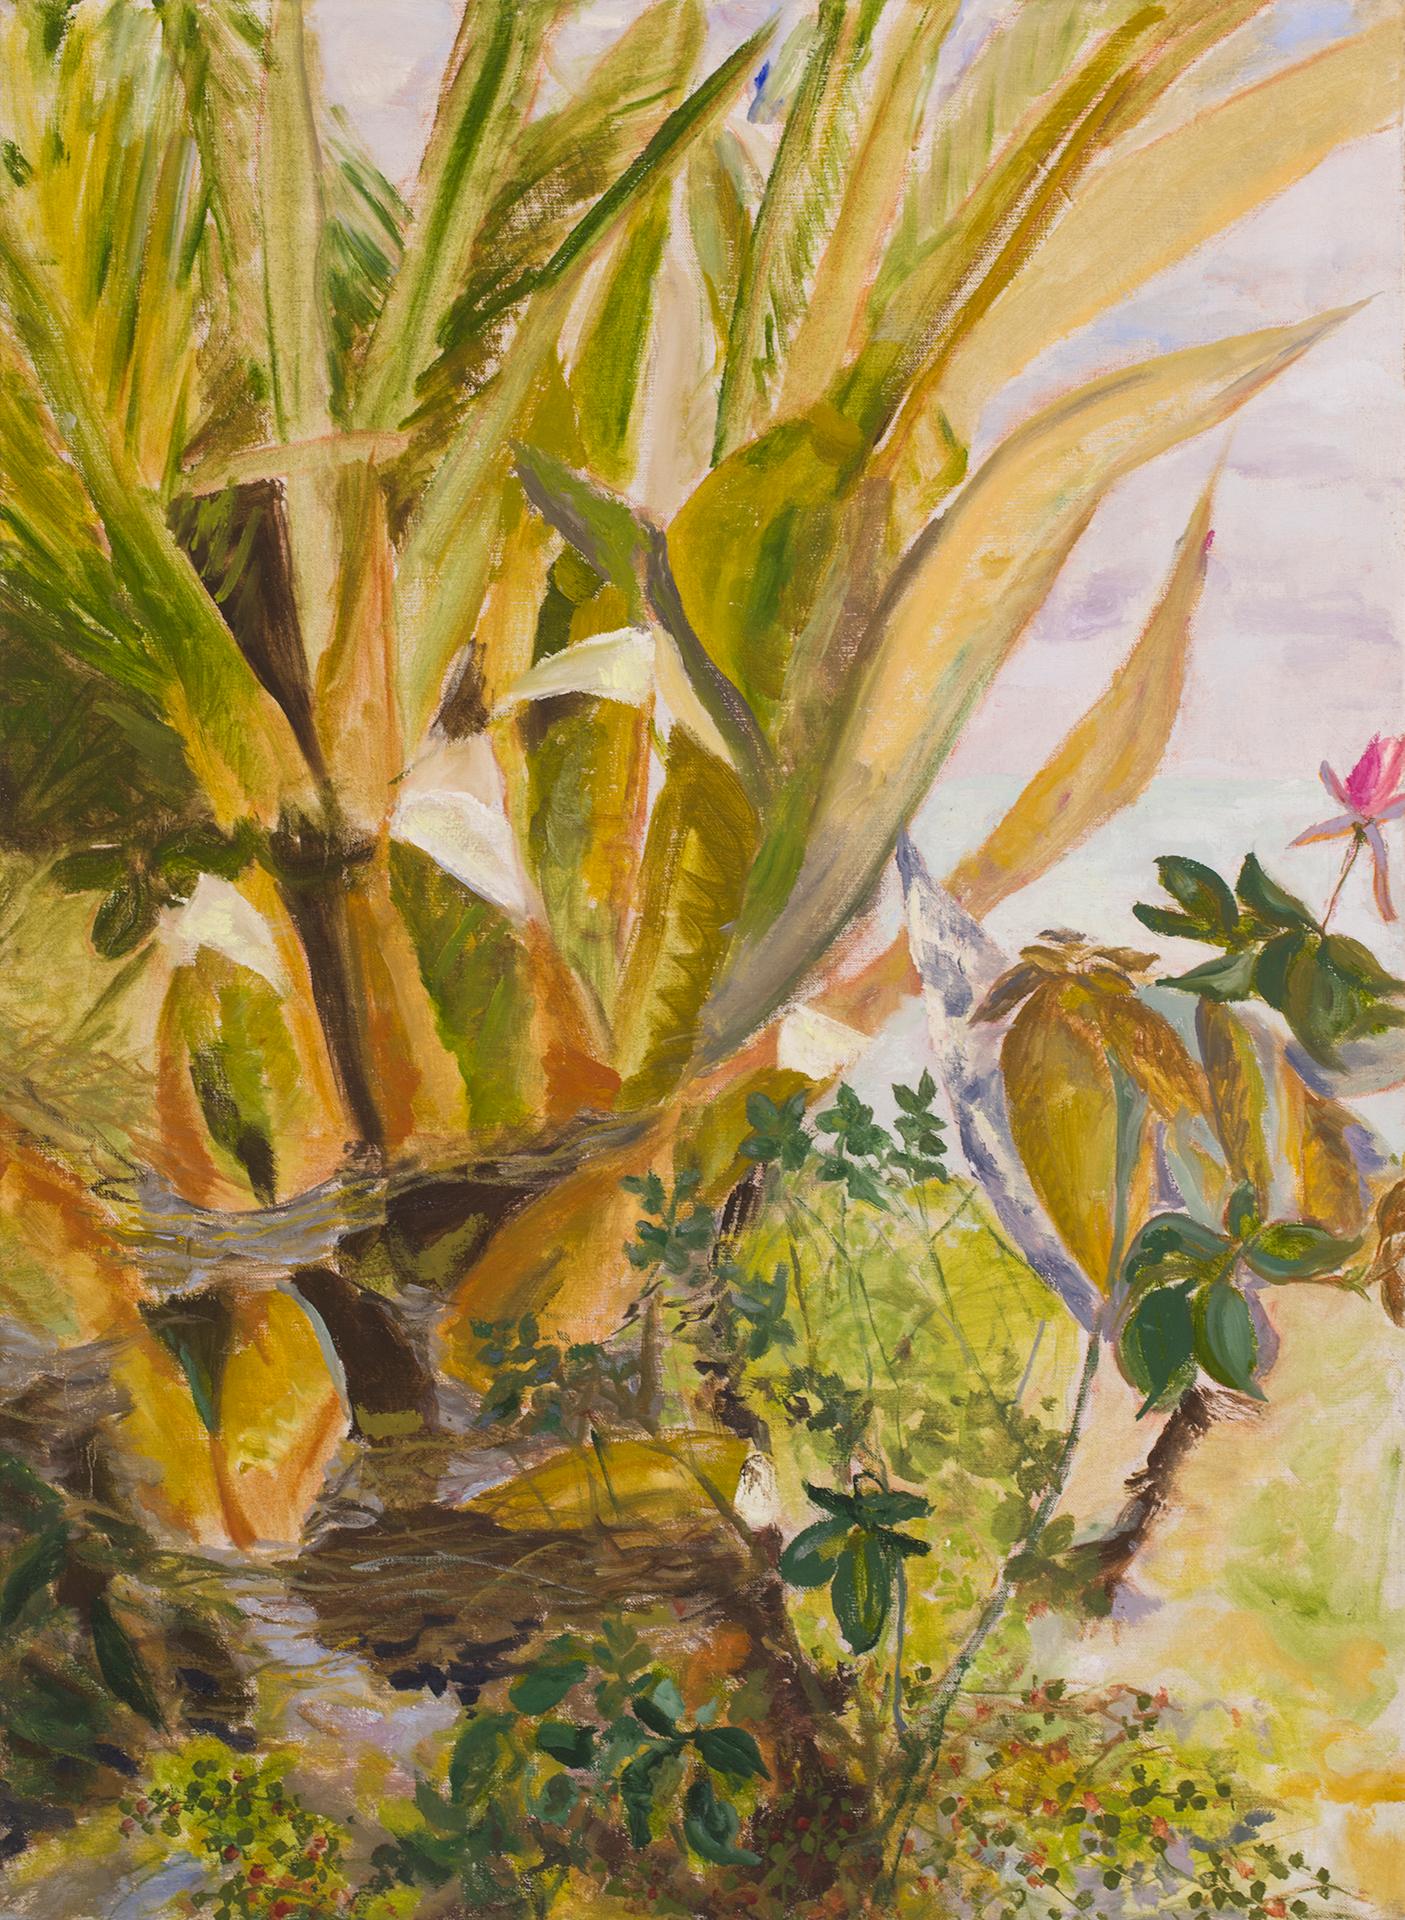 Contemporary Plant Oil Painting: ochre, warm green palm, rose, sea. St Ives, UK
 
I was in St. Ives in Cornwall, England for a short painting residency in the month of November 2015. The colors of warm yellows, ochres and sage greens reflect the